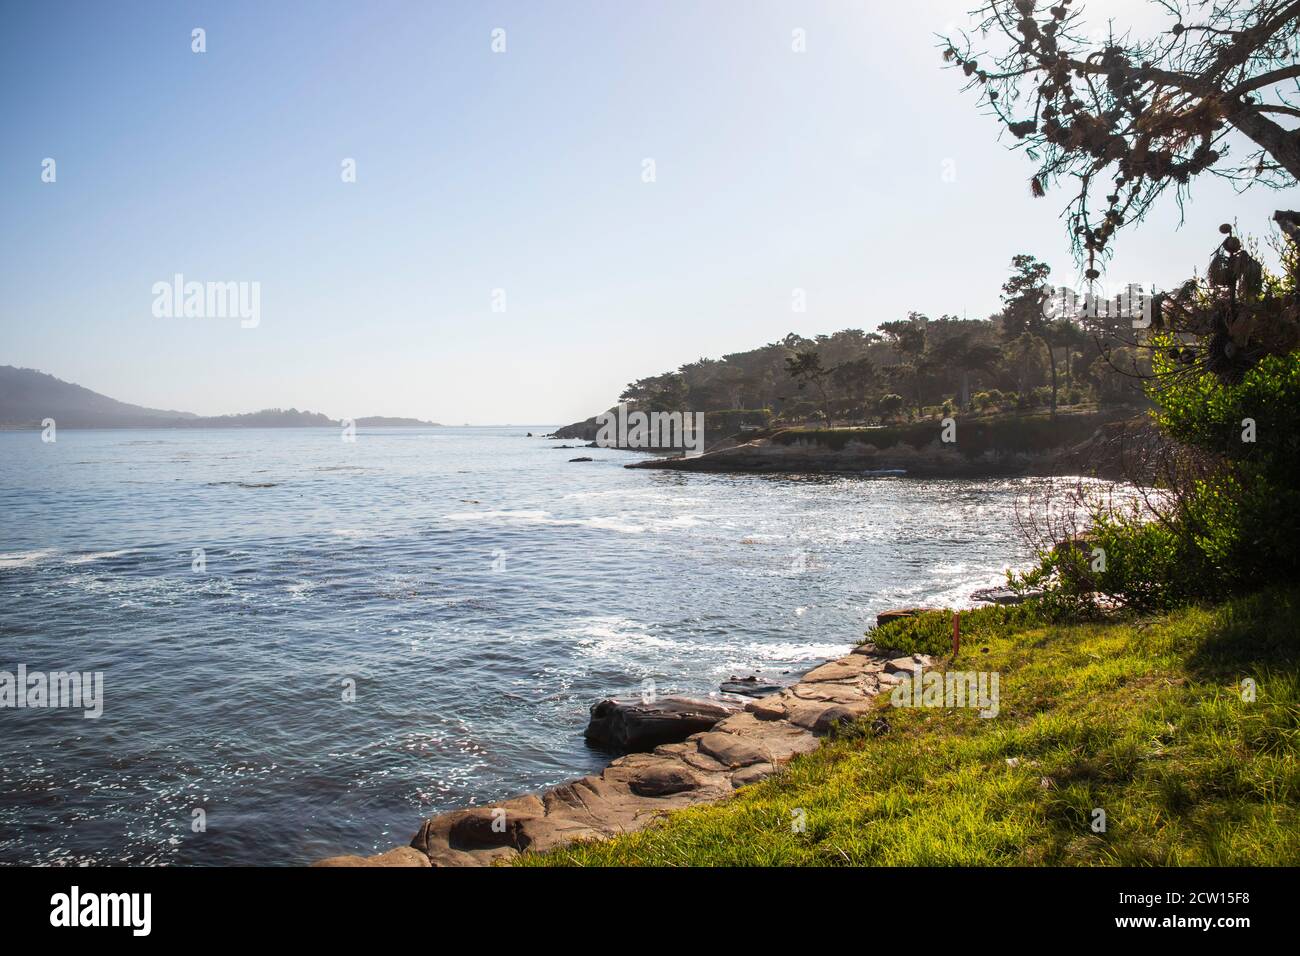 Point Joe, Del Monte Forest, California, 2020 : Golf course views of seaside links of the Monterey Peninsula Country Club located on the 17 Mile Drive Stock Photo